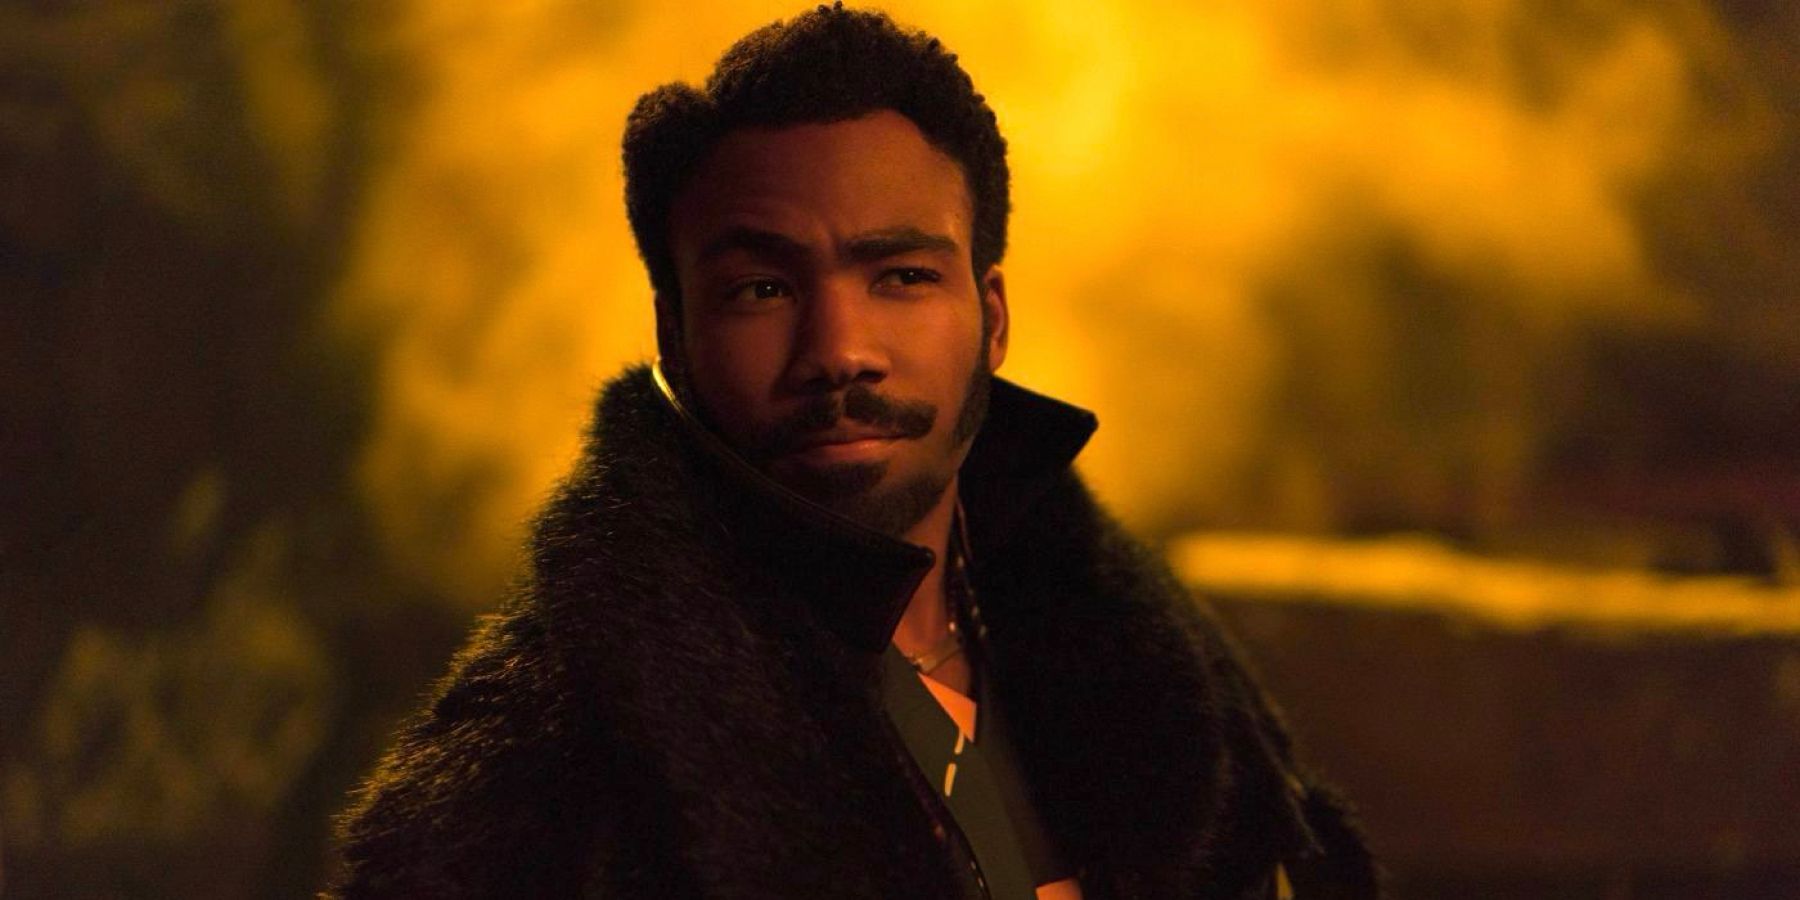 Lando Calrissian looks roguishly charming in the shipyard of Vandor in Solo: A Star Wars Story.